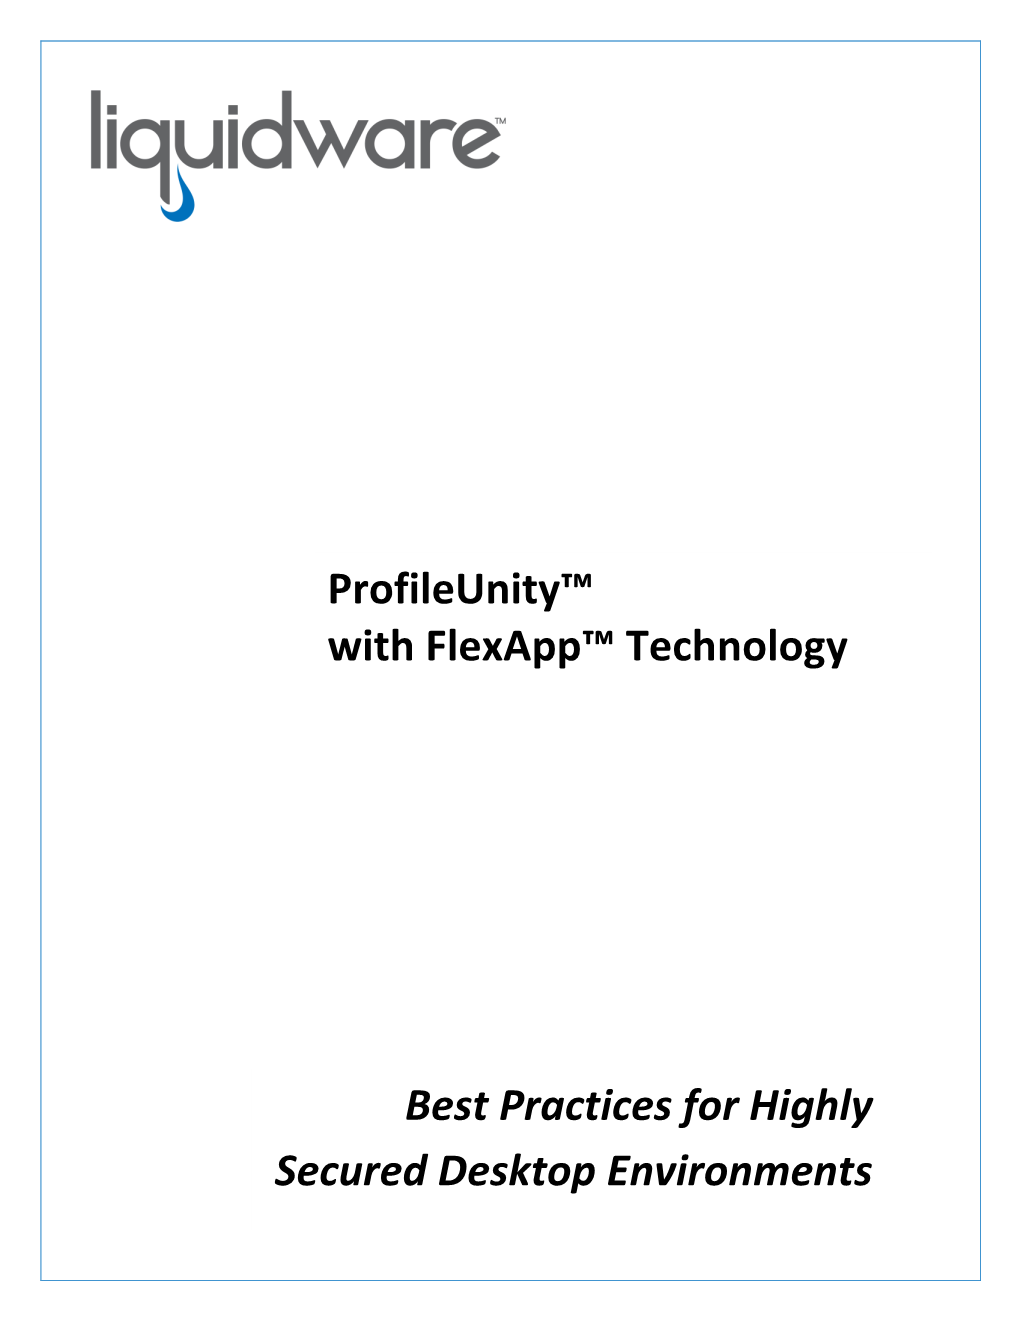 Best Practices for Highly Secured Desktop Environments Page 1